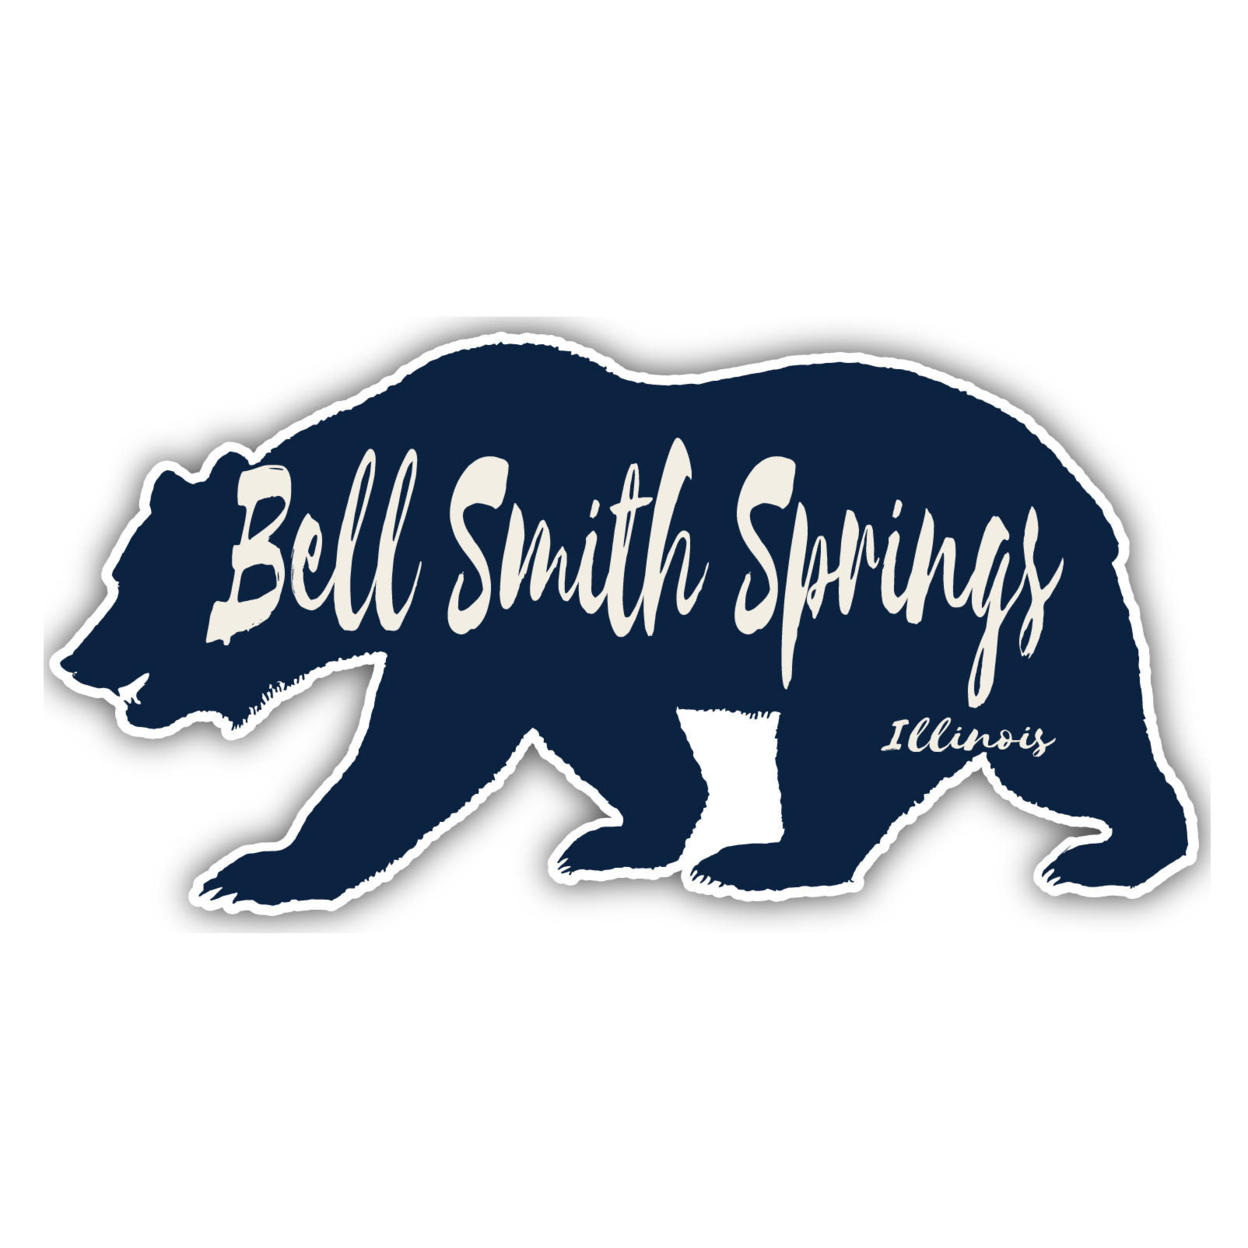 Bell Smith Springs Illinois Souvenir Decorative Stickers (Choose Theme And Size) - Single Unit, 12-Inch, Bear